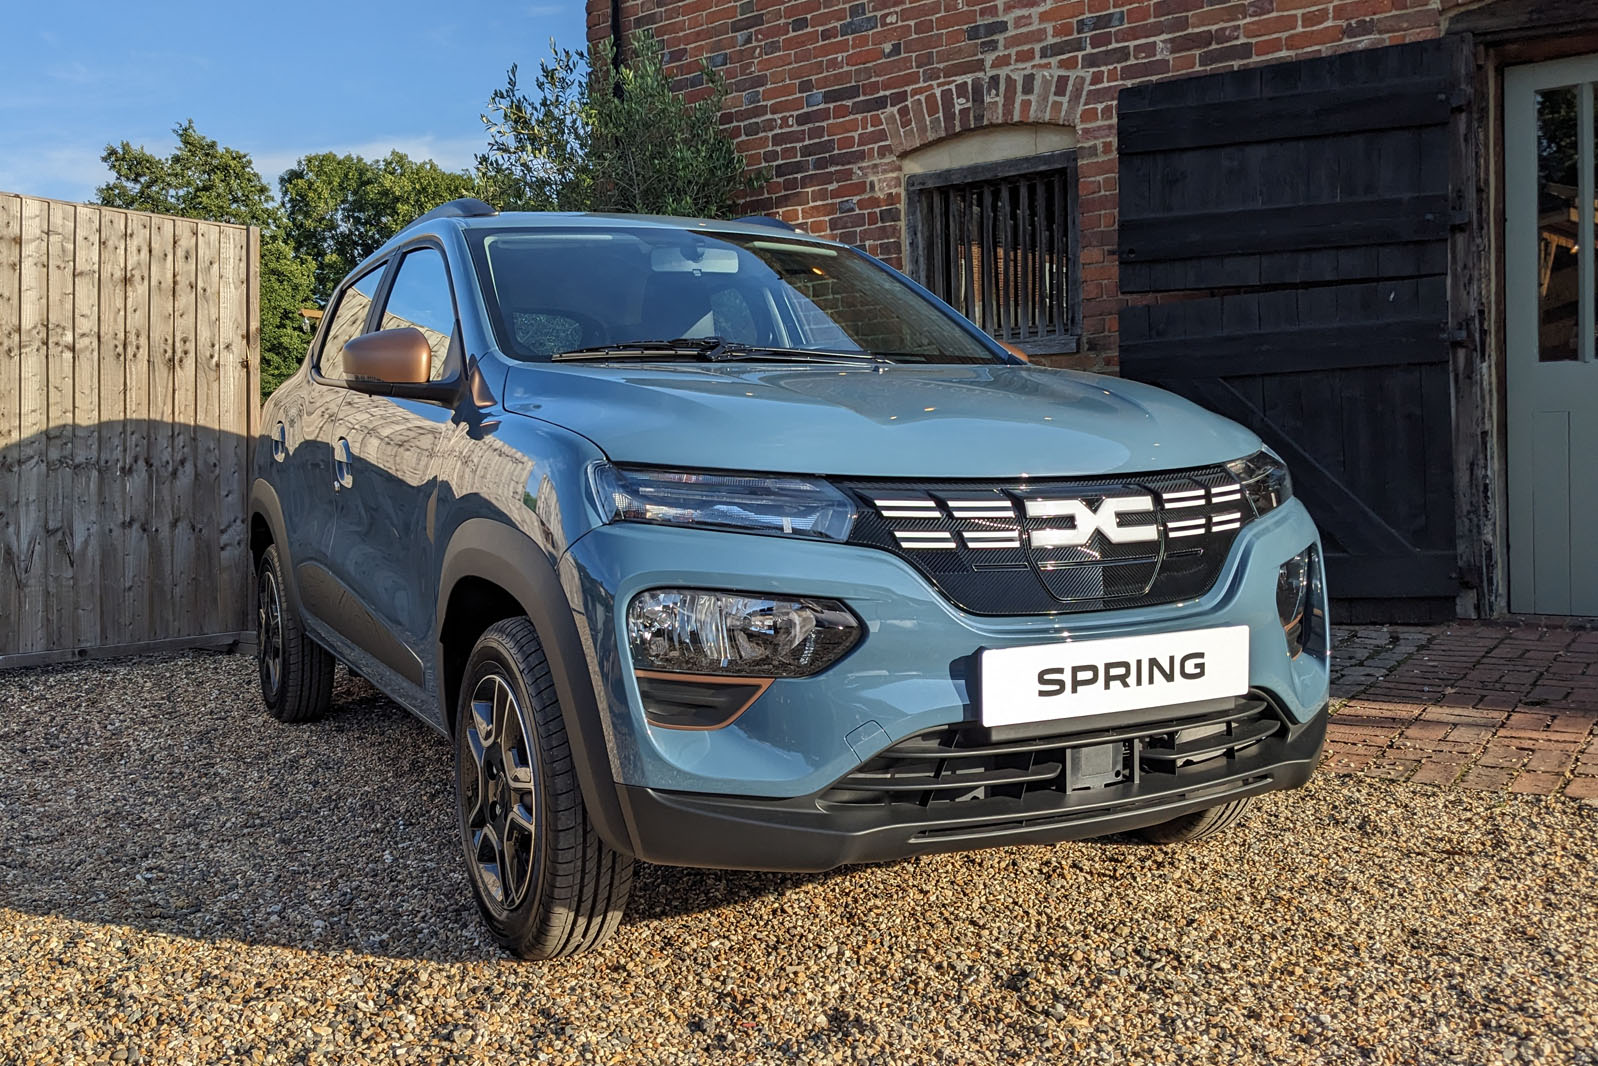 https://www.autocar.co.uk/sites/autocar.co.uk/files/images/car-reviews/first-drives/legacy/dacia_spring_front_3_4.jpg